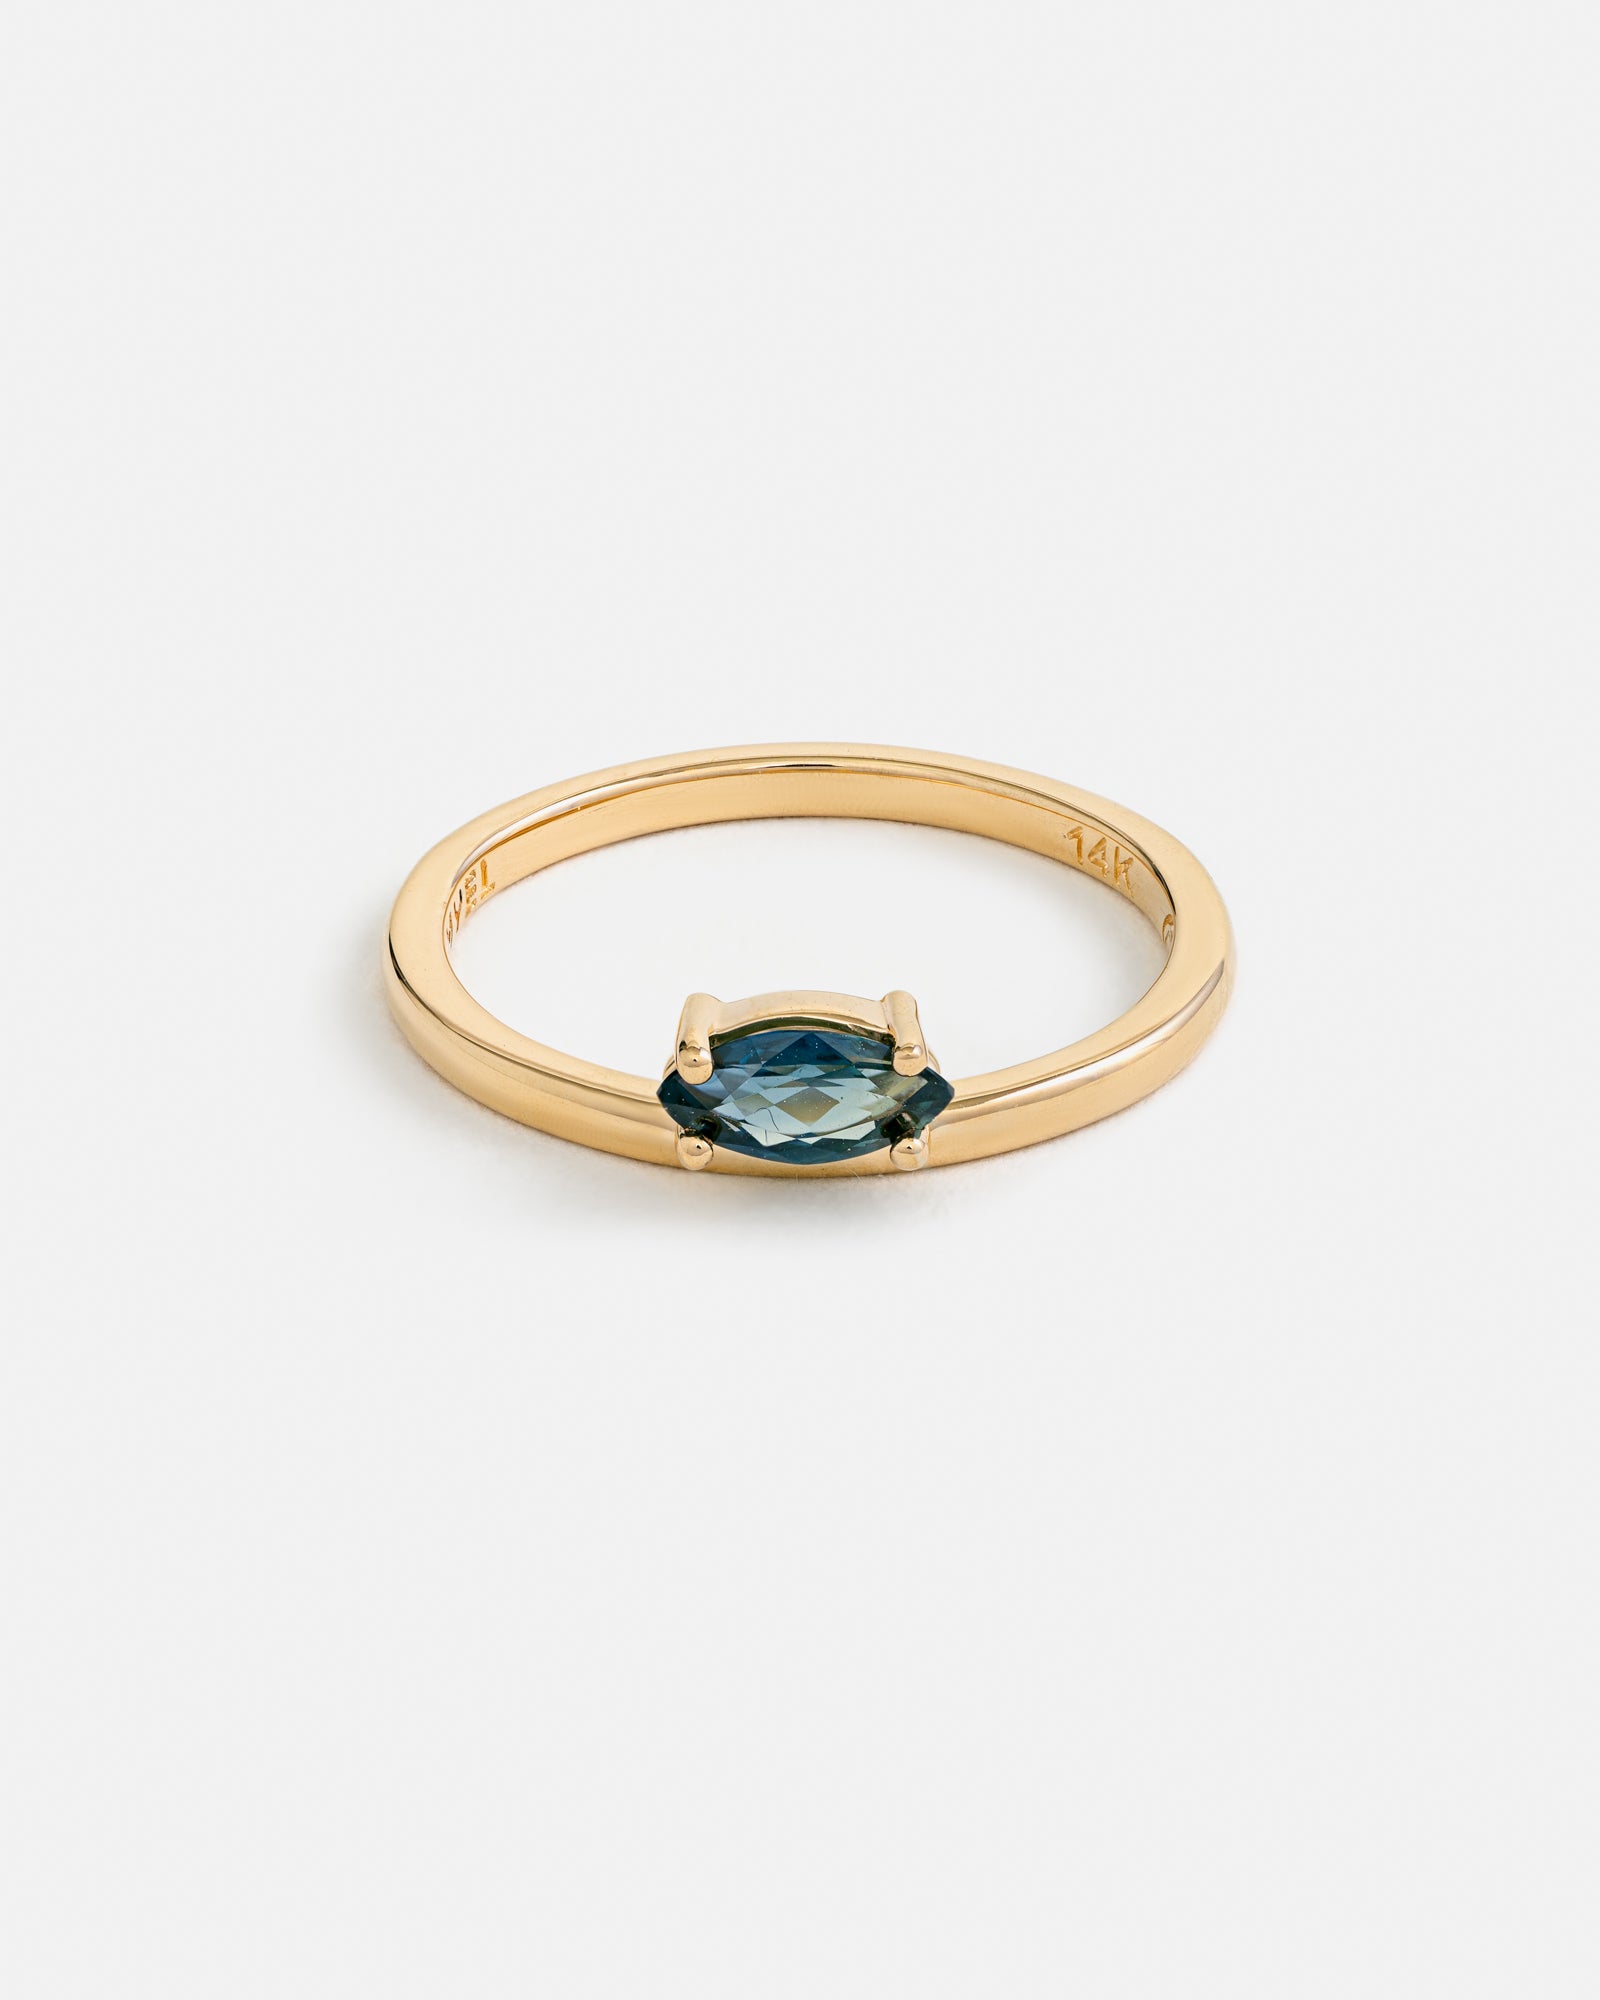 Off-set Marquise ring in Fairmined Gold with Green Australian Sapphire